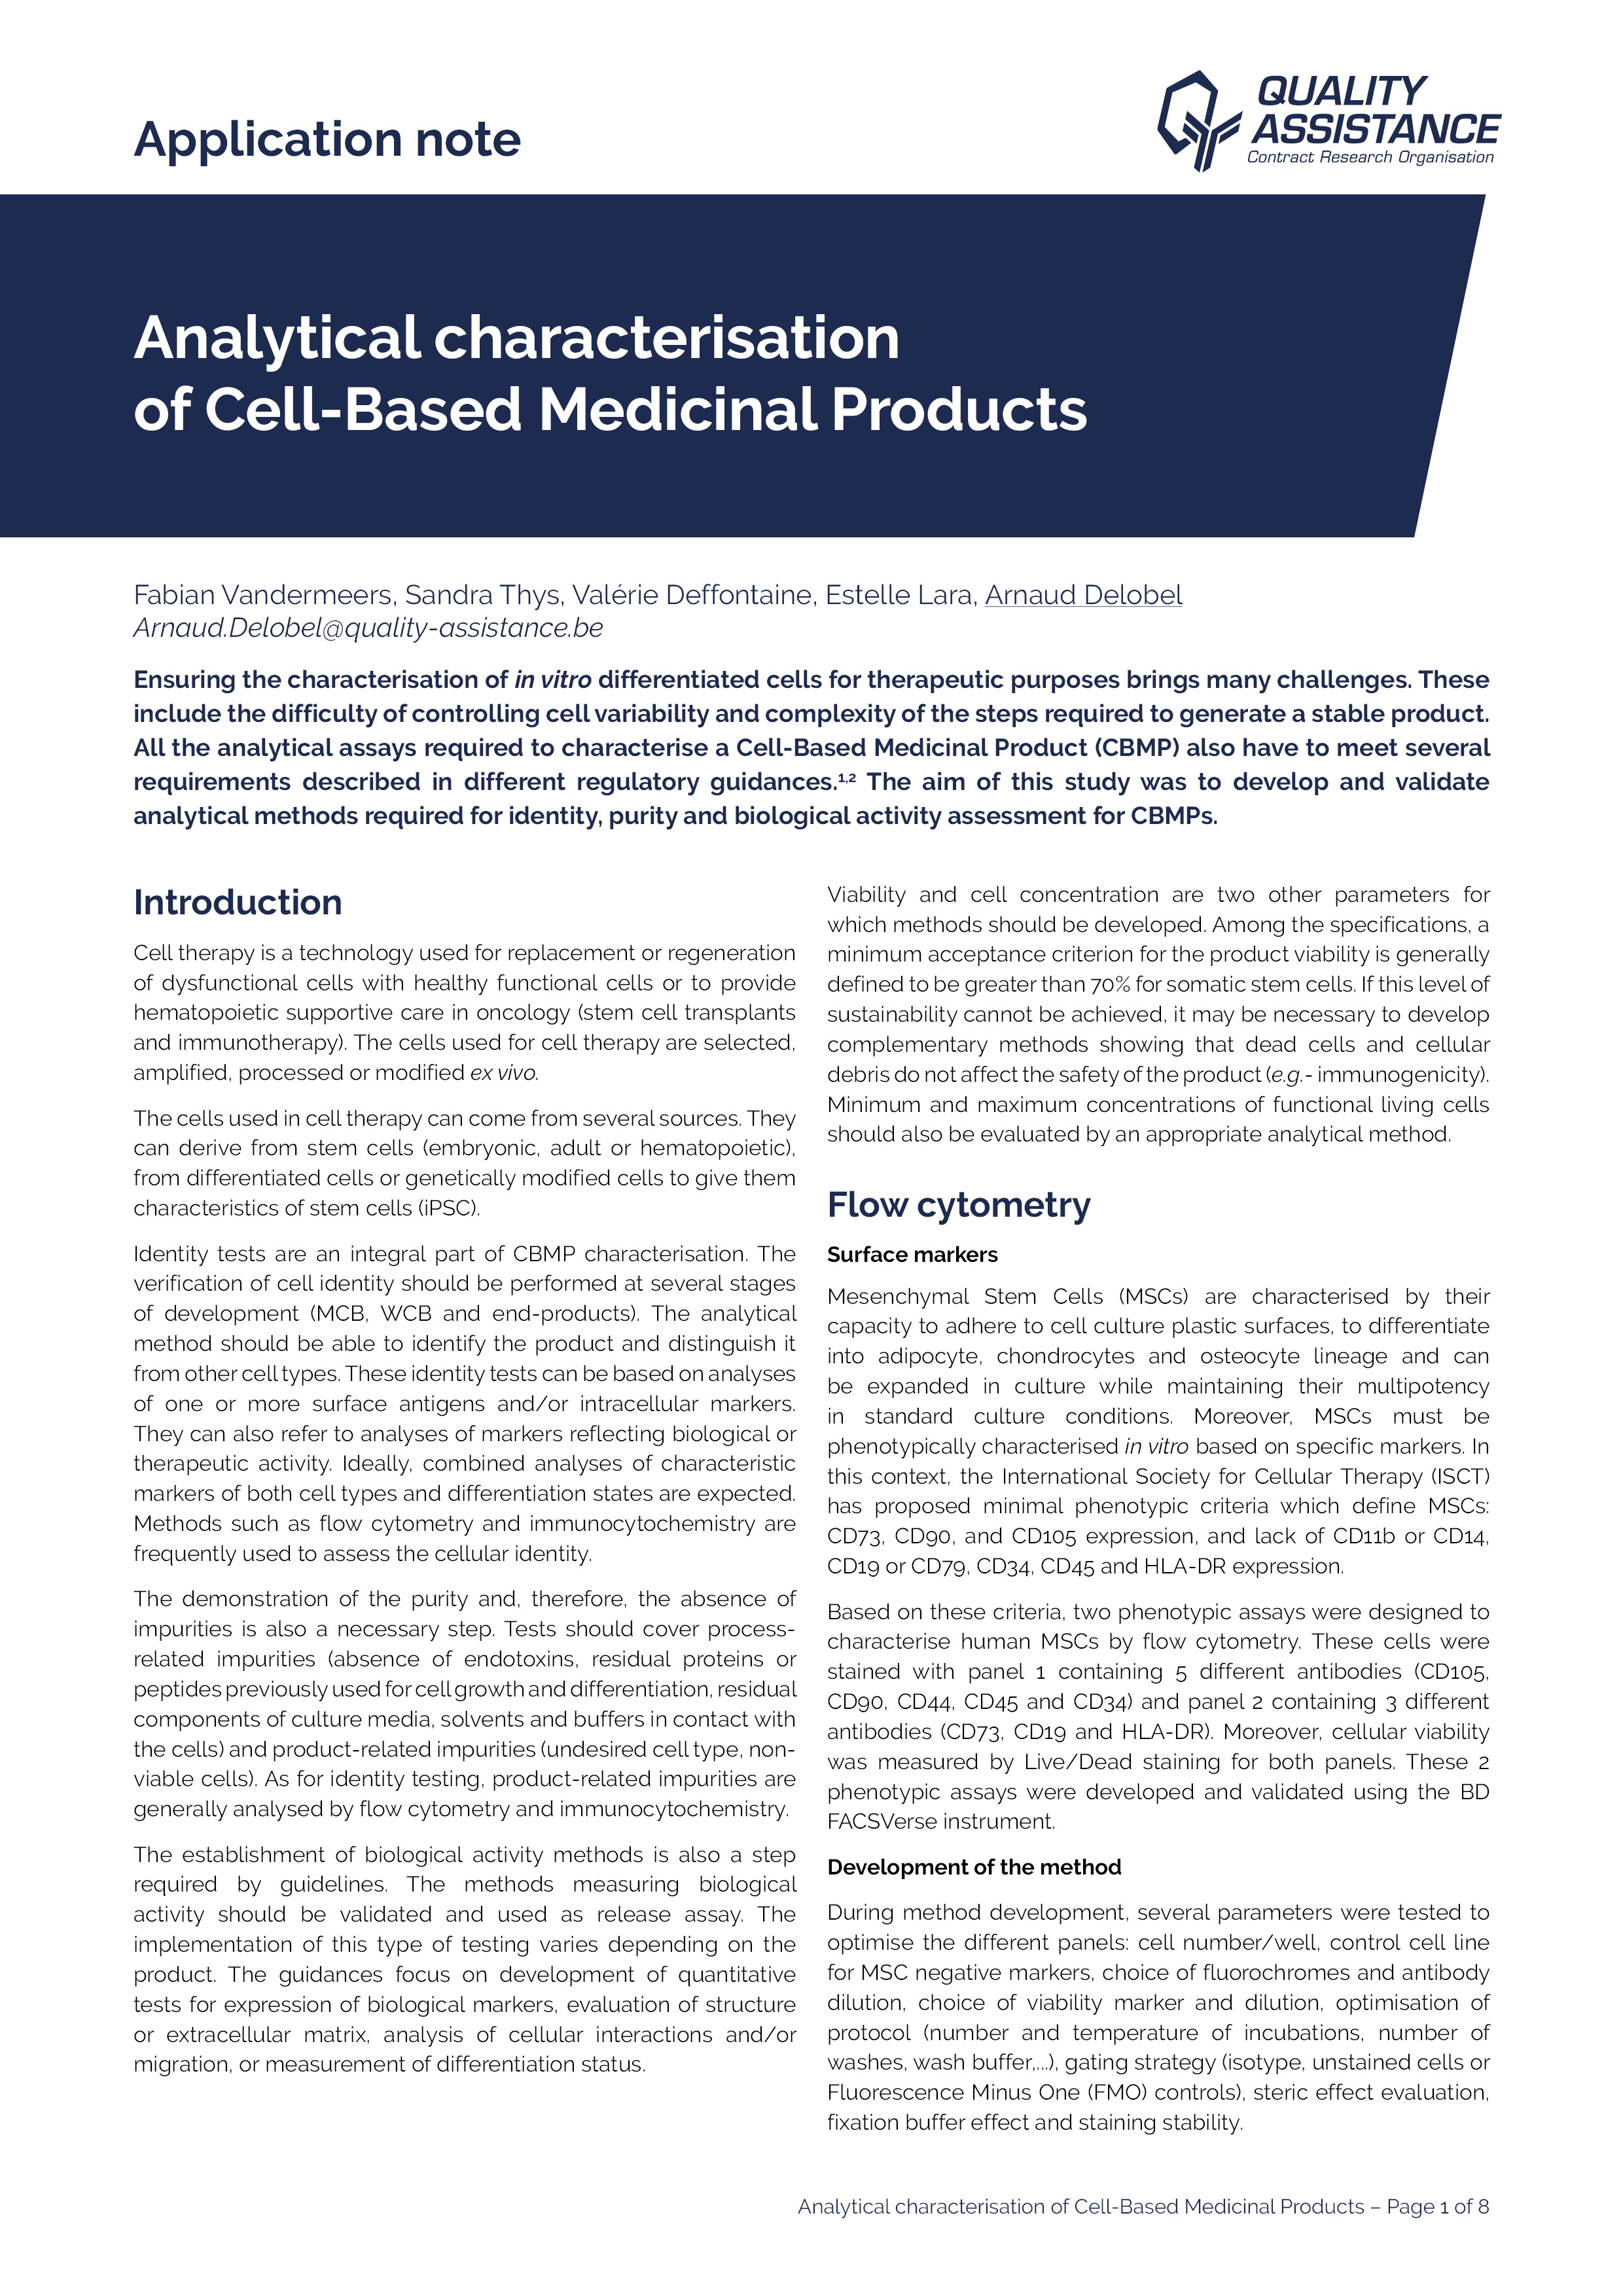 Quality Assistance Analytical Characterisation of Cell Based Medicinal Products